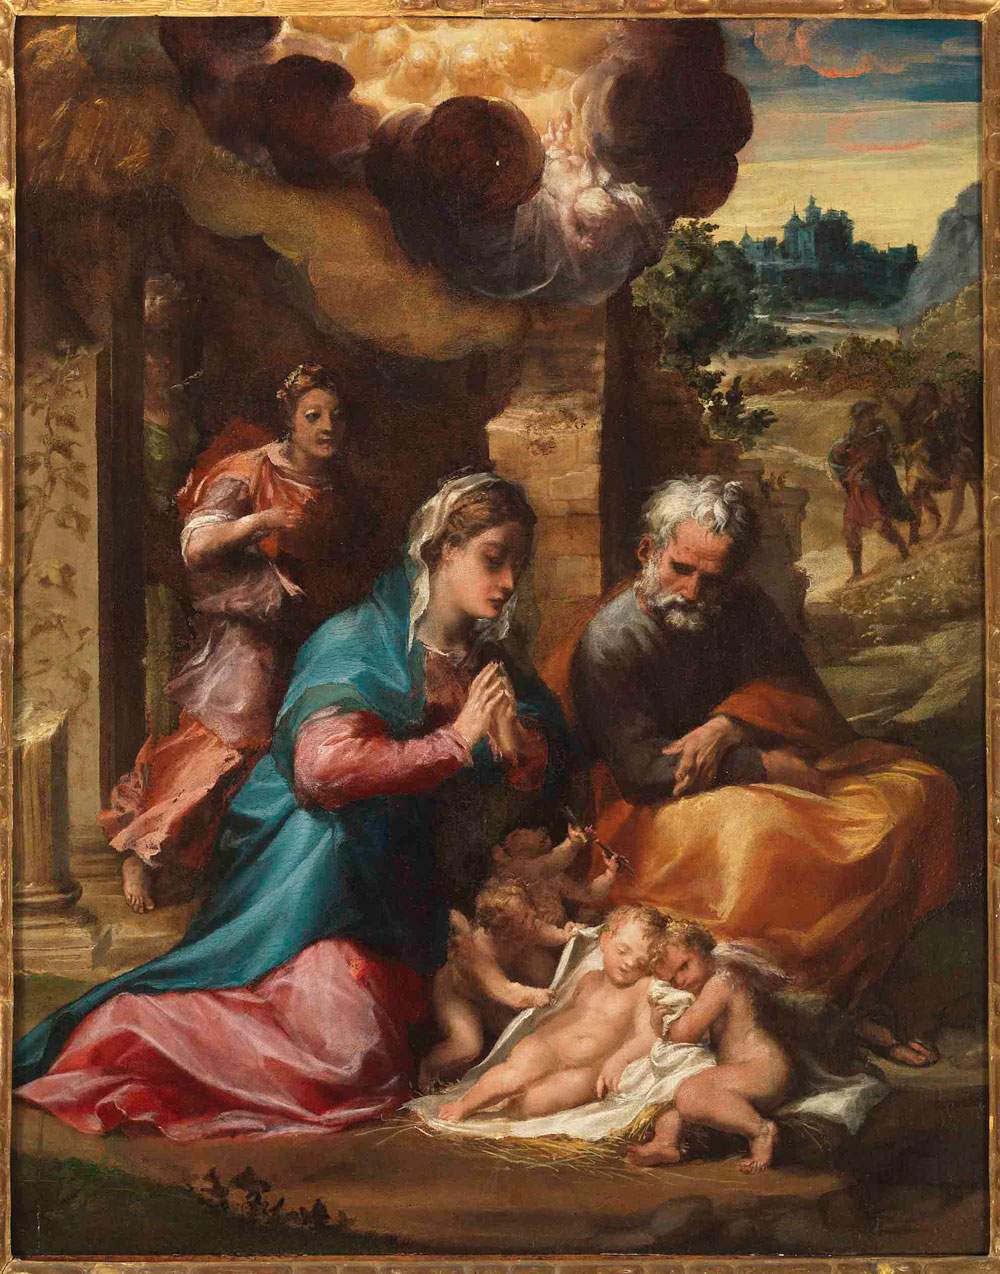 Michelangelo Anselmi's restored Adoration of the Child on display in Milan